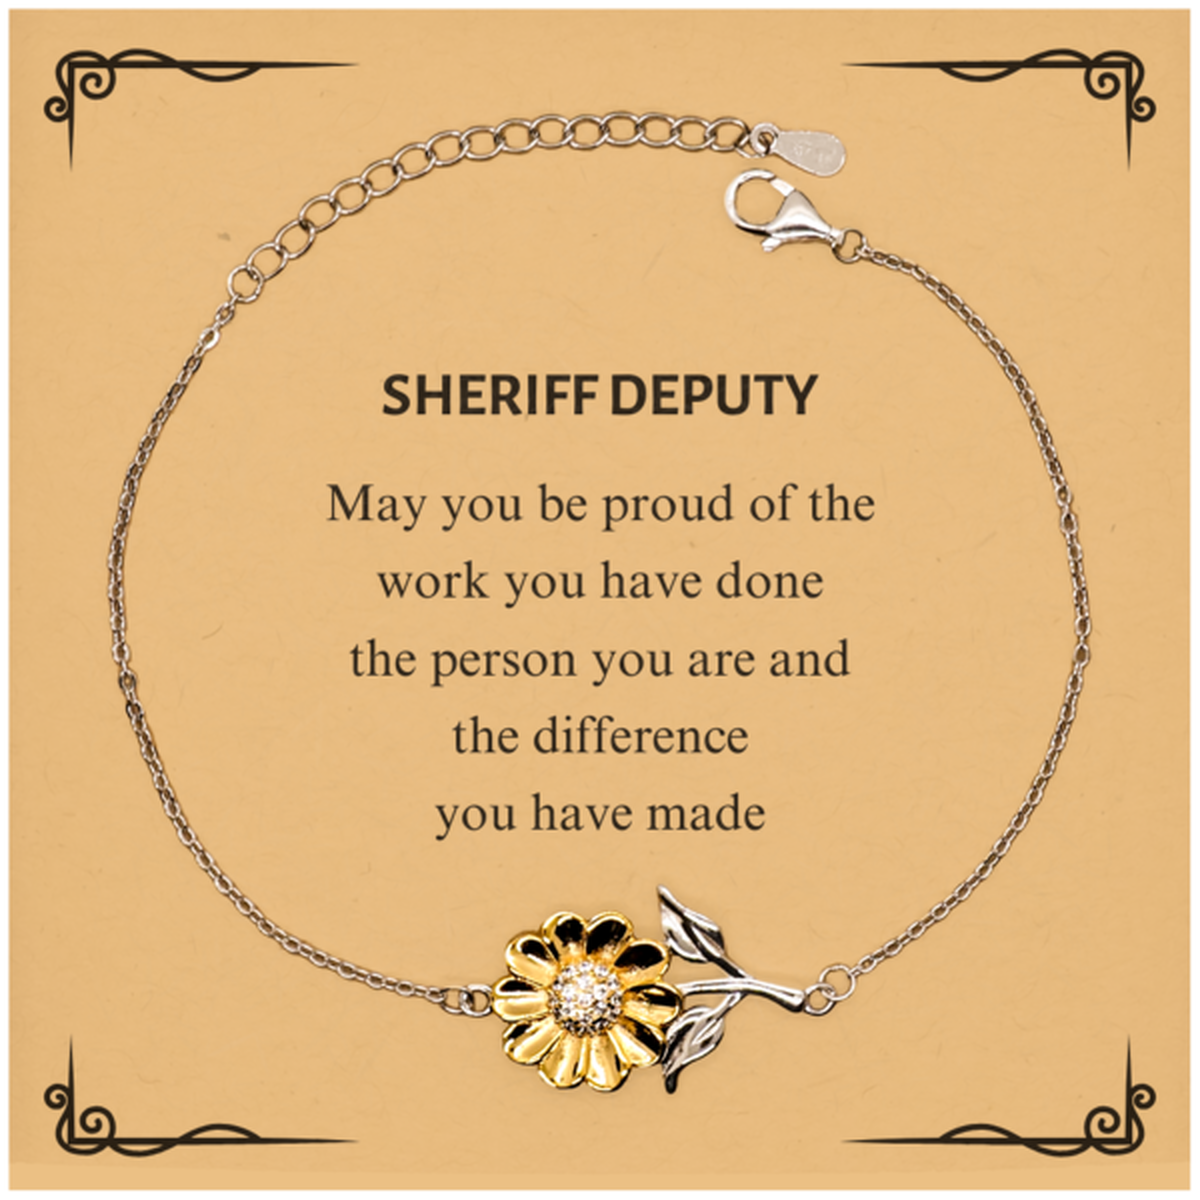 Sheriff Deputy May you be proud of the work you have done, Retirement Sheriff Deputy Sunflower Bracelet for Colleague Appreciation Gifts Amazing for Sheriff Deputy